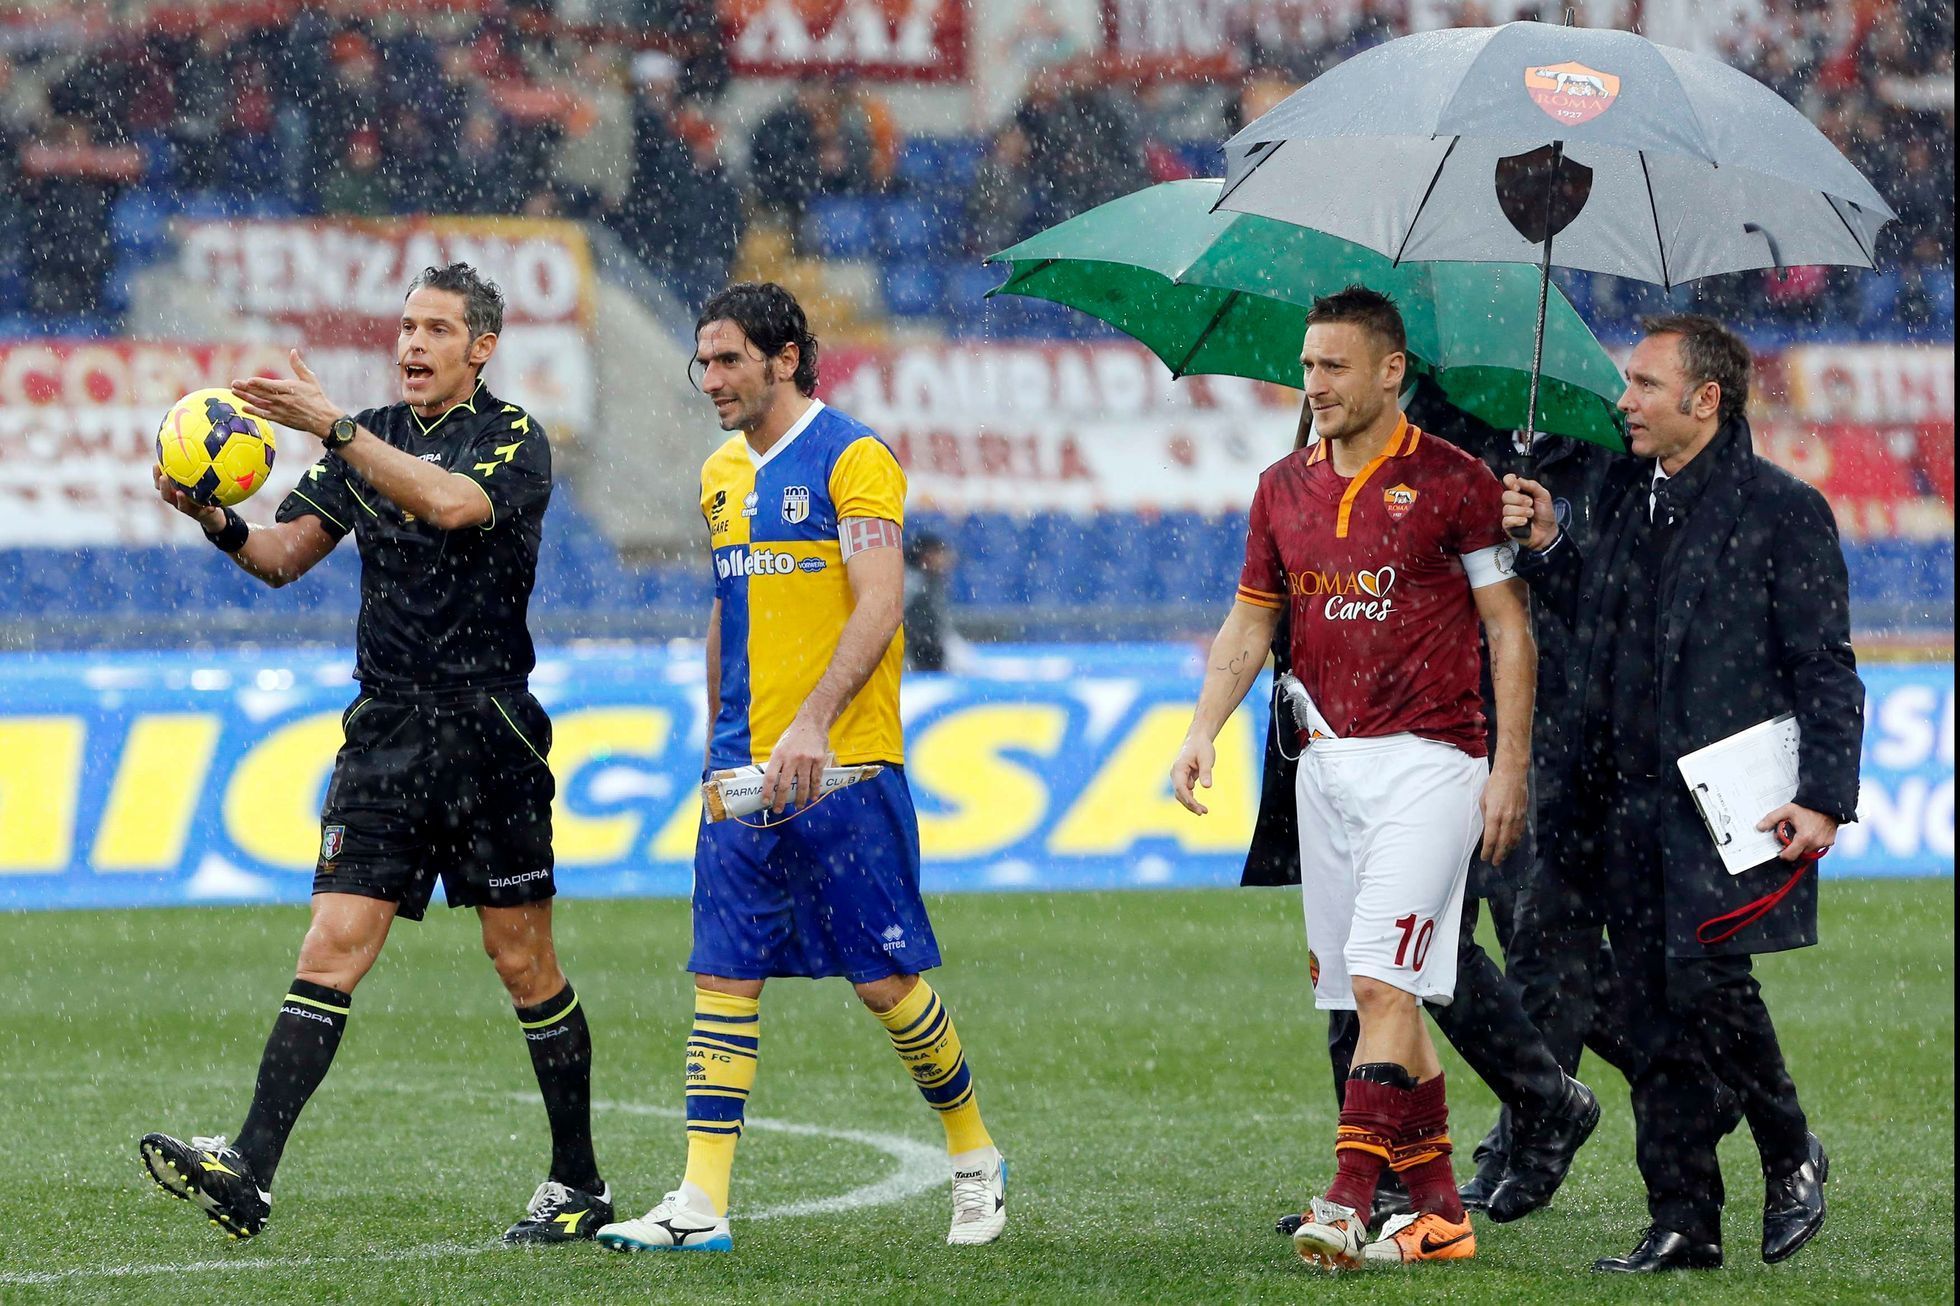 Referee De Marco, Parma's Lucarelli and AS Roma's Totti inspect the field under heavy rain before their Italian Serie A soccer match in Rome